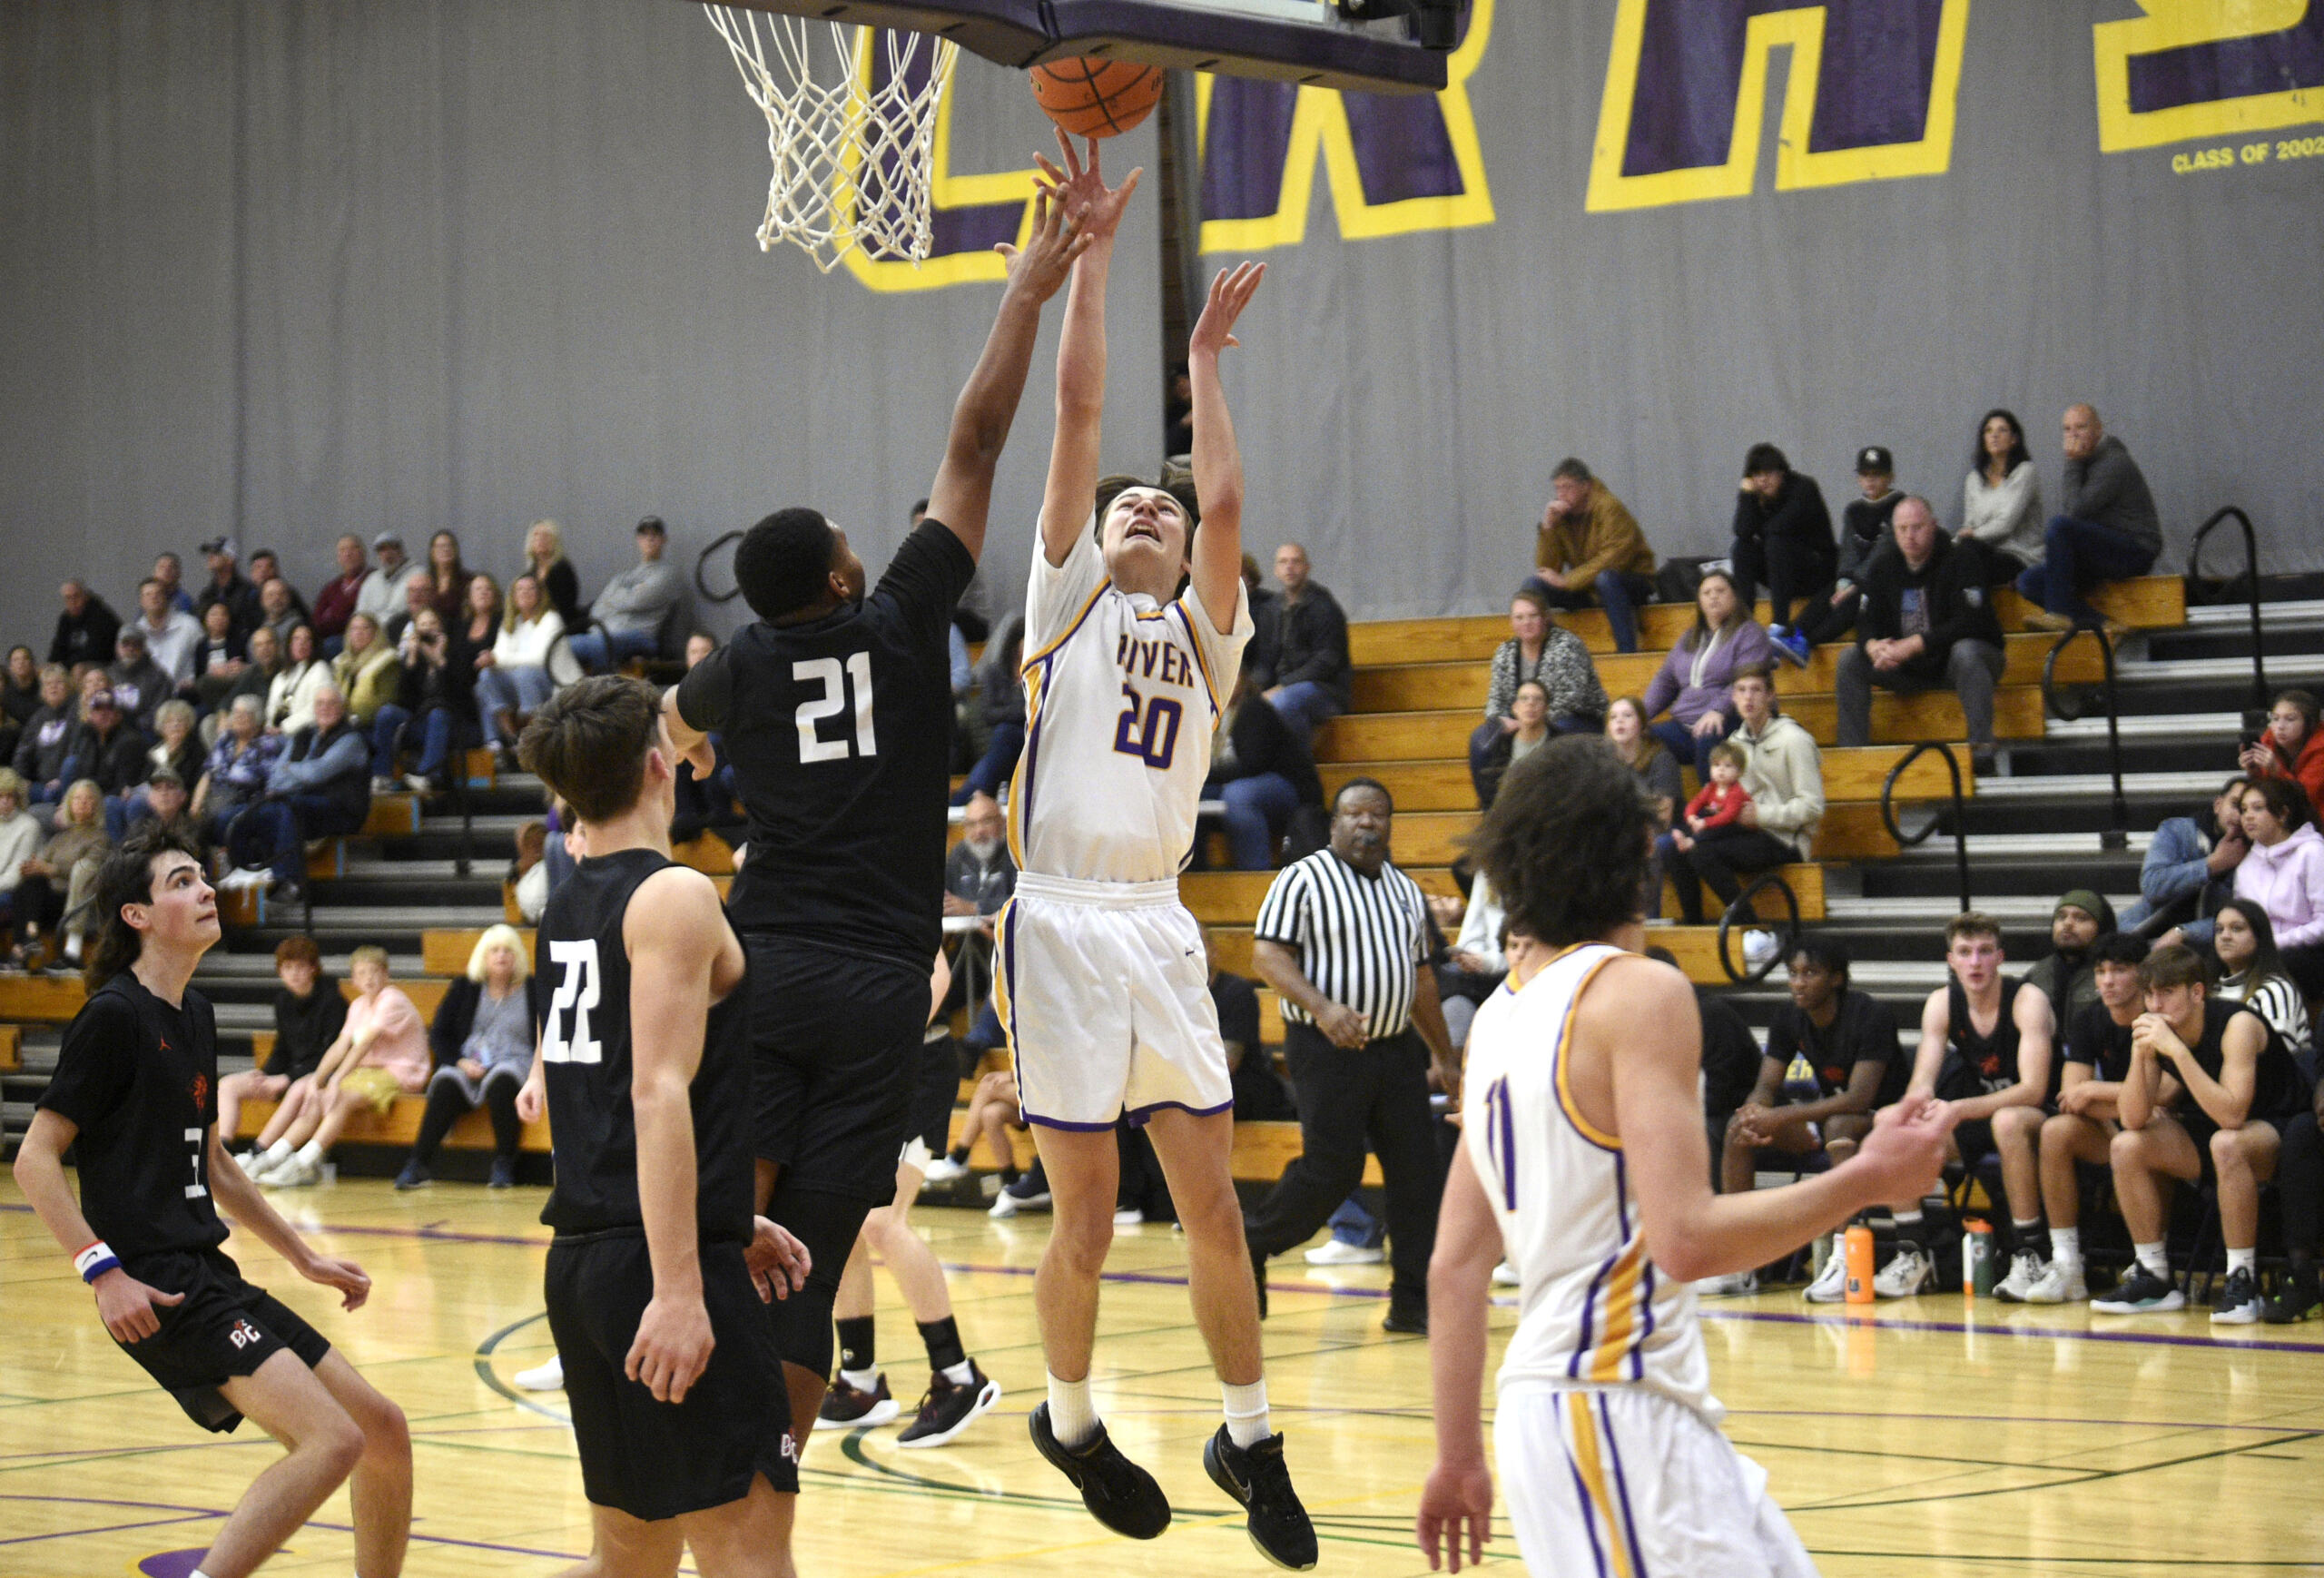 Columbia River’s Luca Phillips (20) goes up for a shot against Battle Ground’s James Gill (21) in a non-league boys basketball game on Tuesday, Nov. 28, 2023, at Columbia River High School.